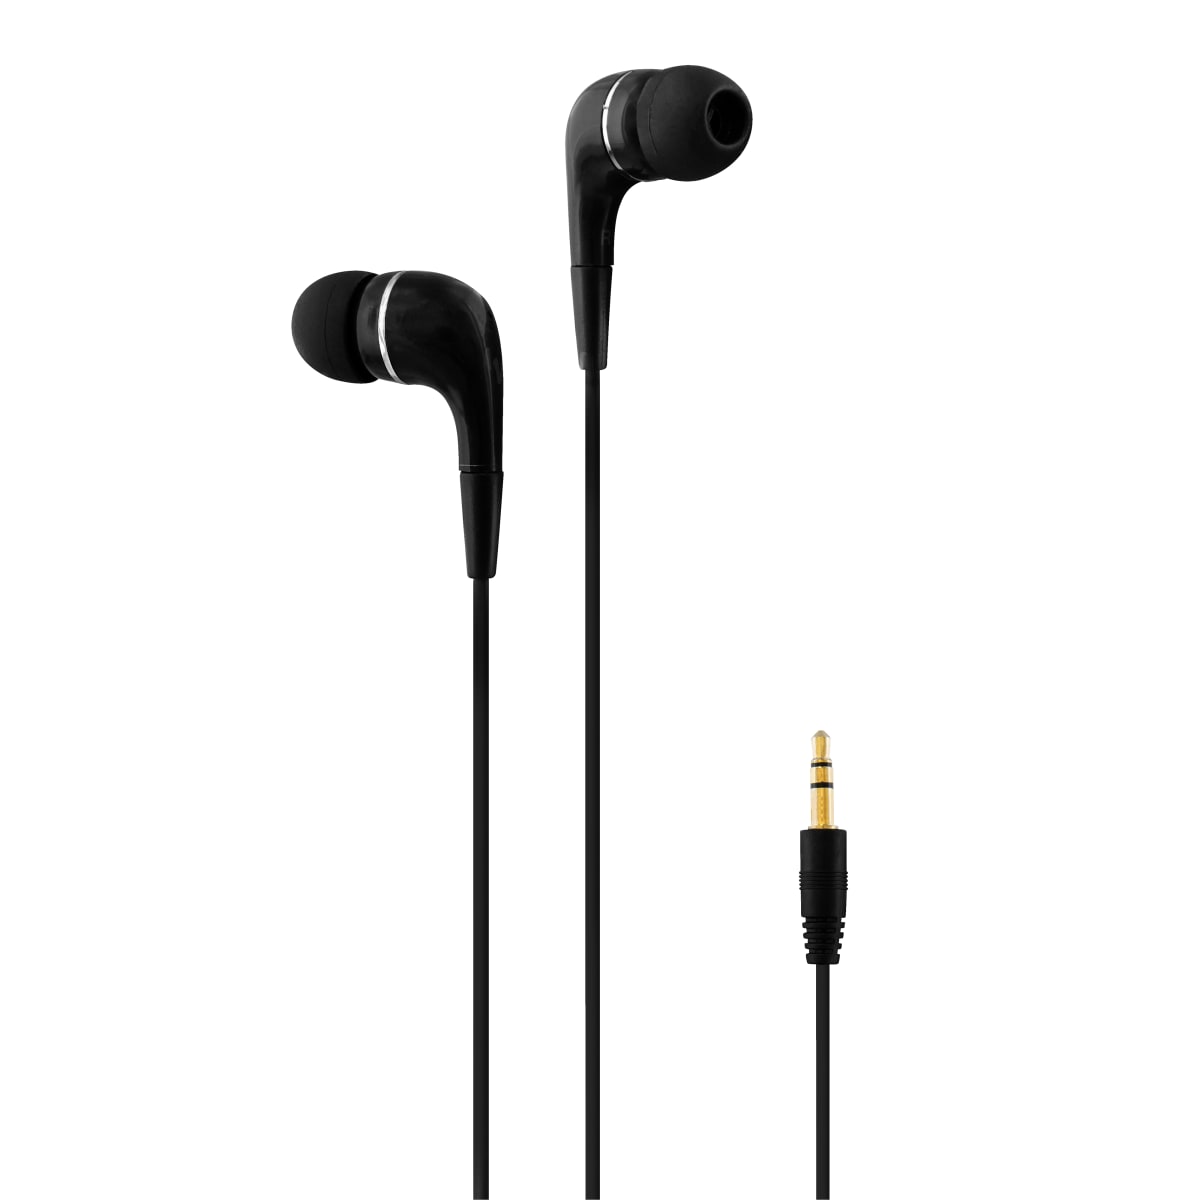 Auriculares con cable PURE jack negro